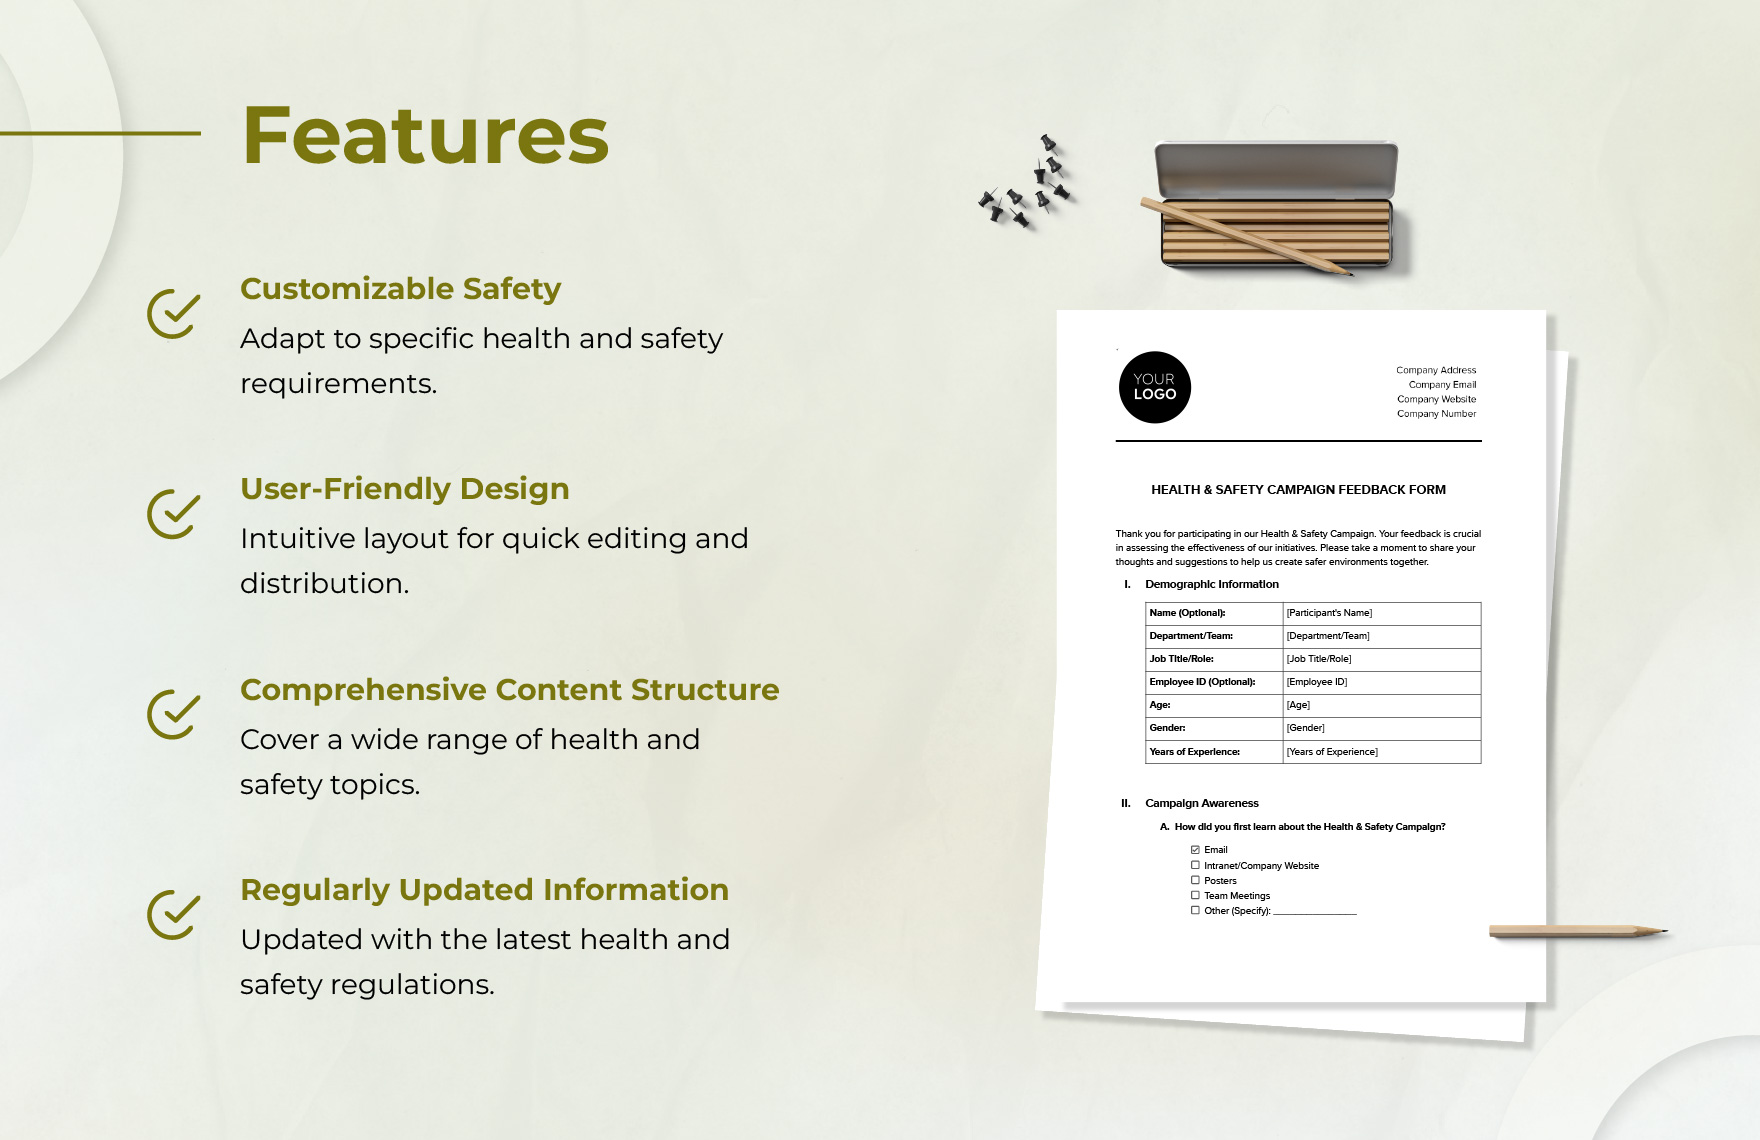 Health & Safety Campaign Feedback Form Template